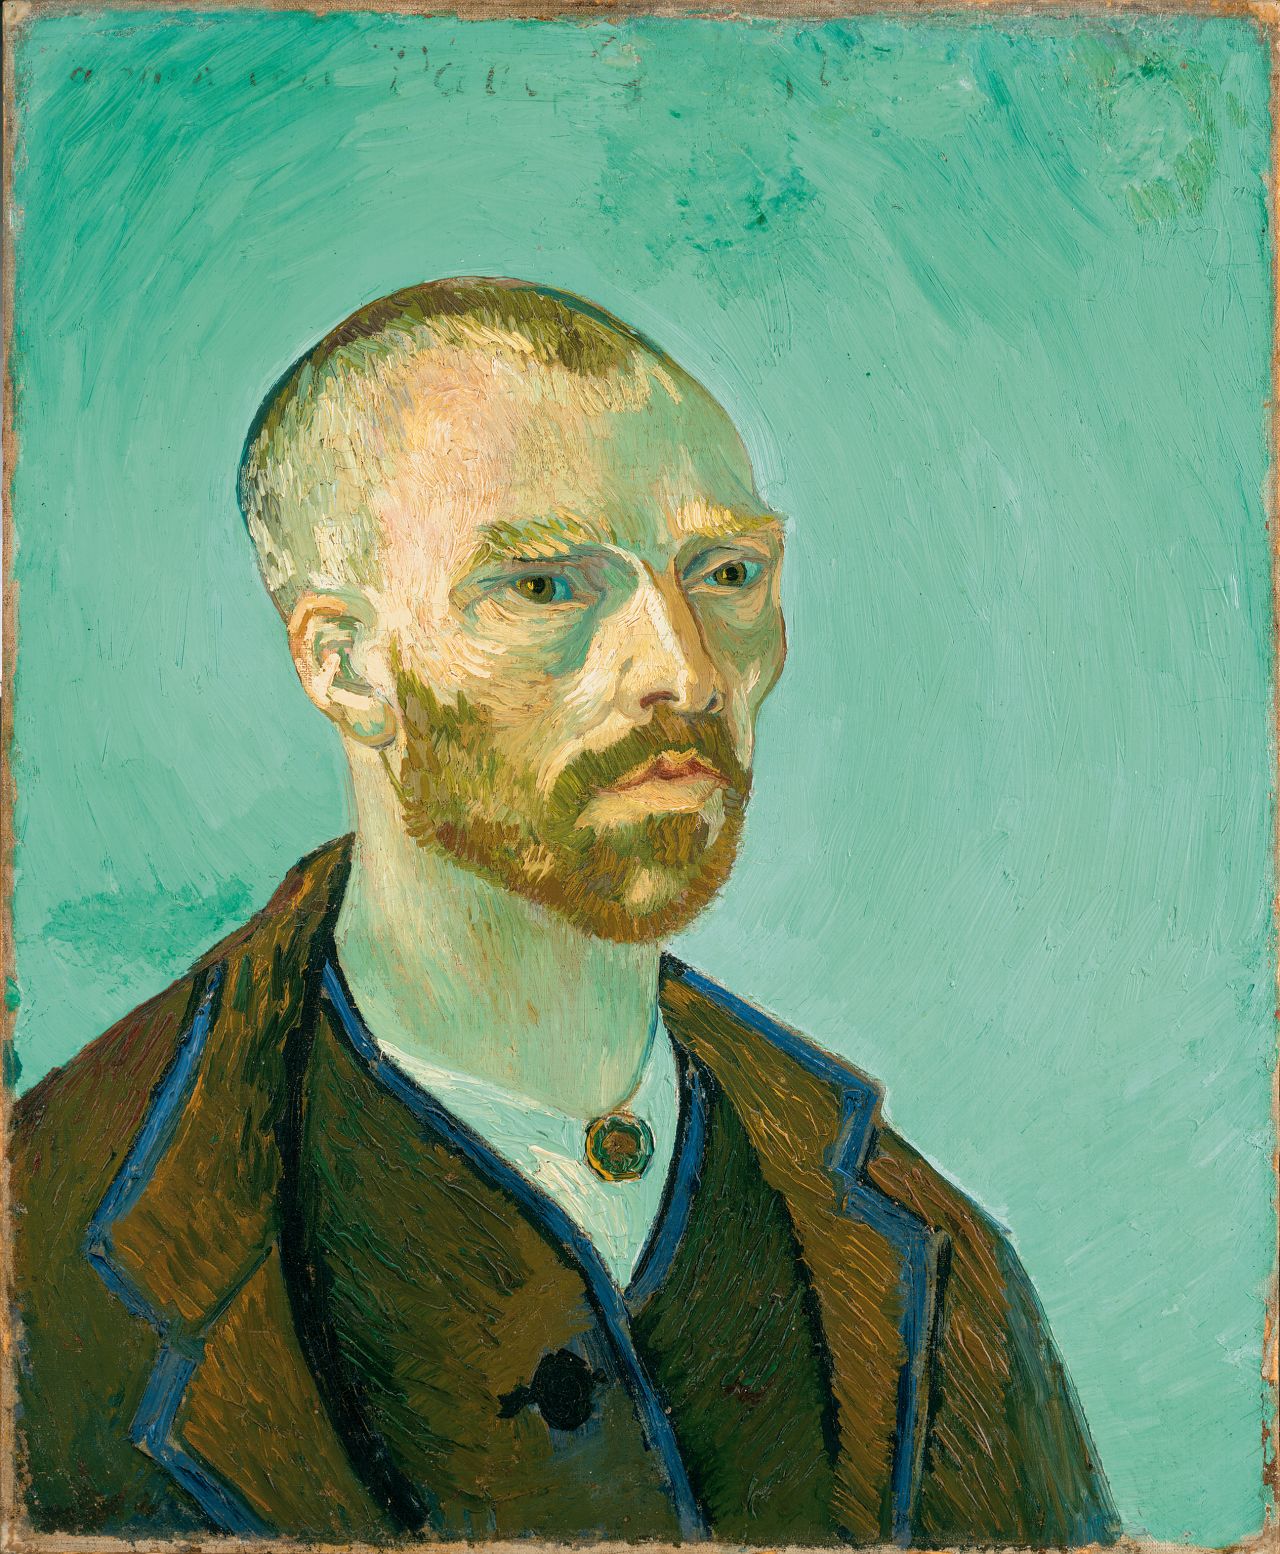 According to a letter Van Gogh wrote to his brother, he reshaped his eyes in this 1888 self-portrait to give himself the appearance of a Japanese monk.